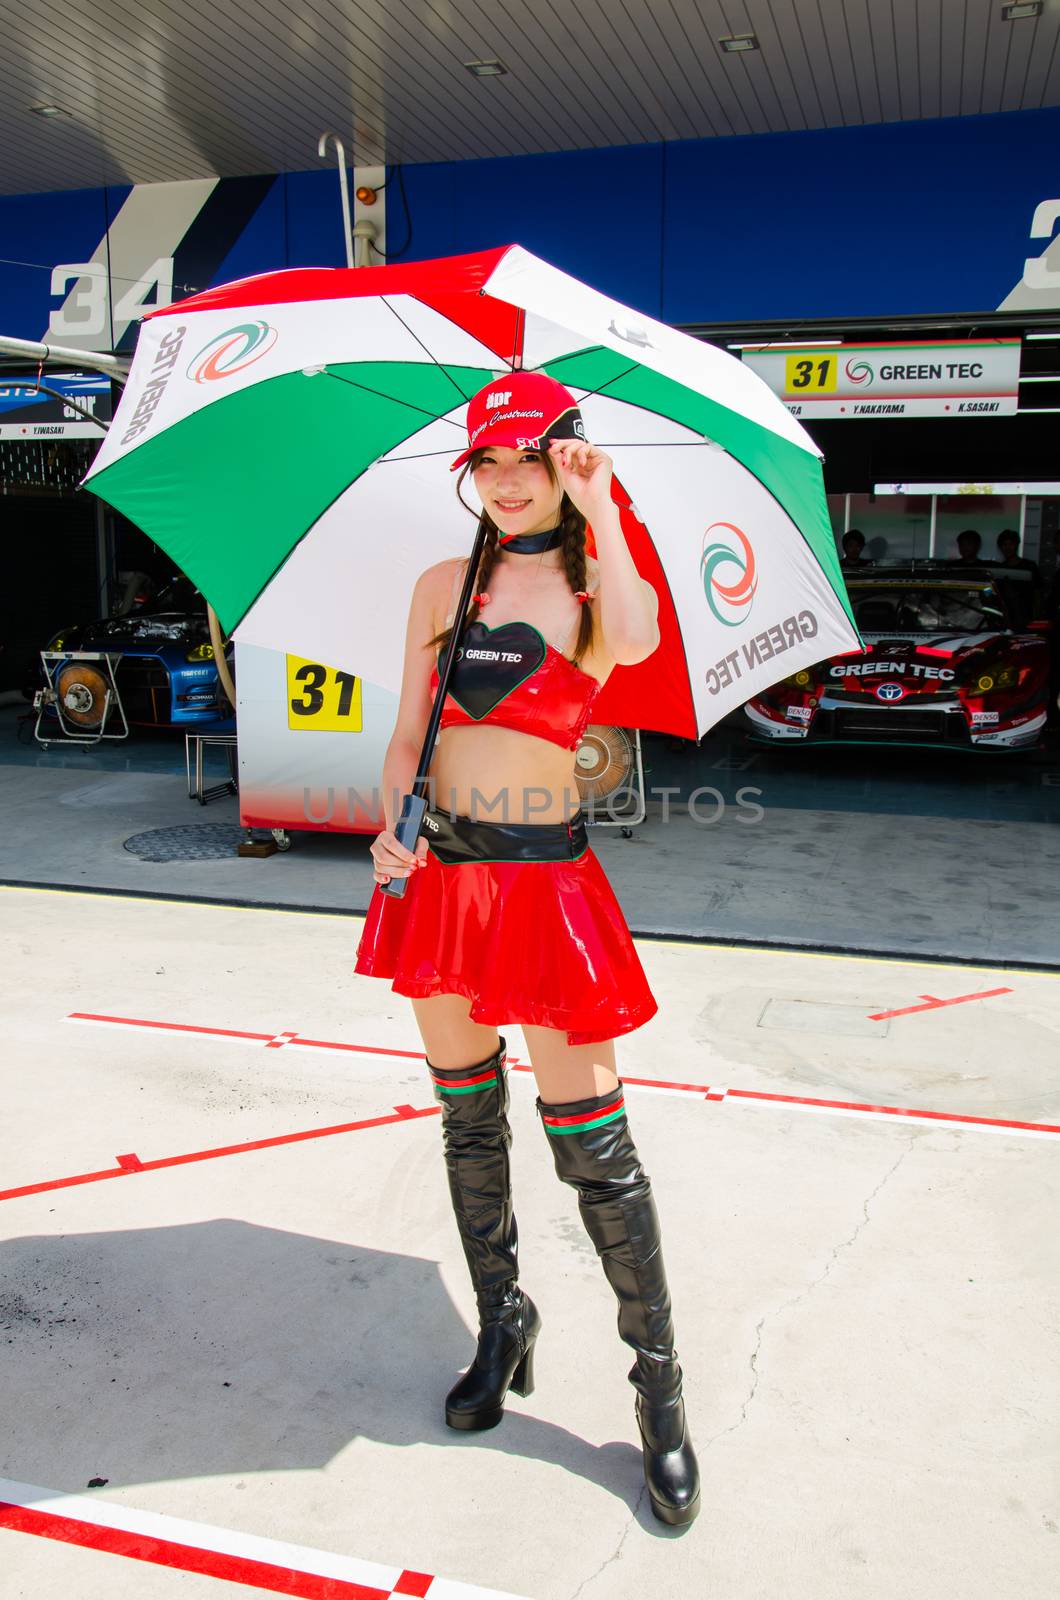 BURIRAM - JUNE 20: Unidentified Race Queen of Japan with racing car on display at The 2015 Autobacs Super GT Series Race 3 on June 20, 2015 at Chang International Racing Circuit, Buriram Thailand